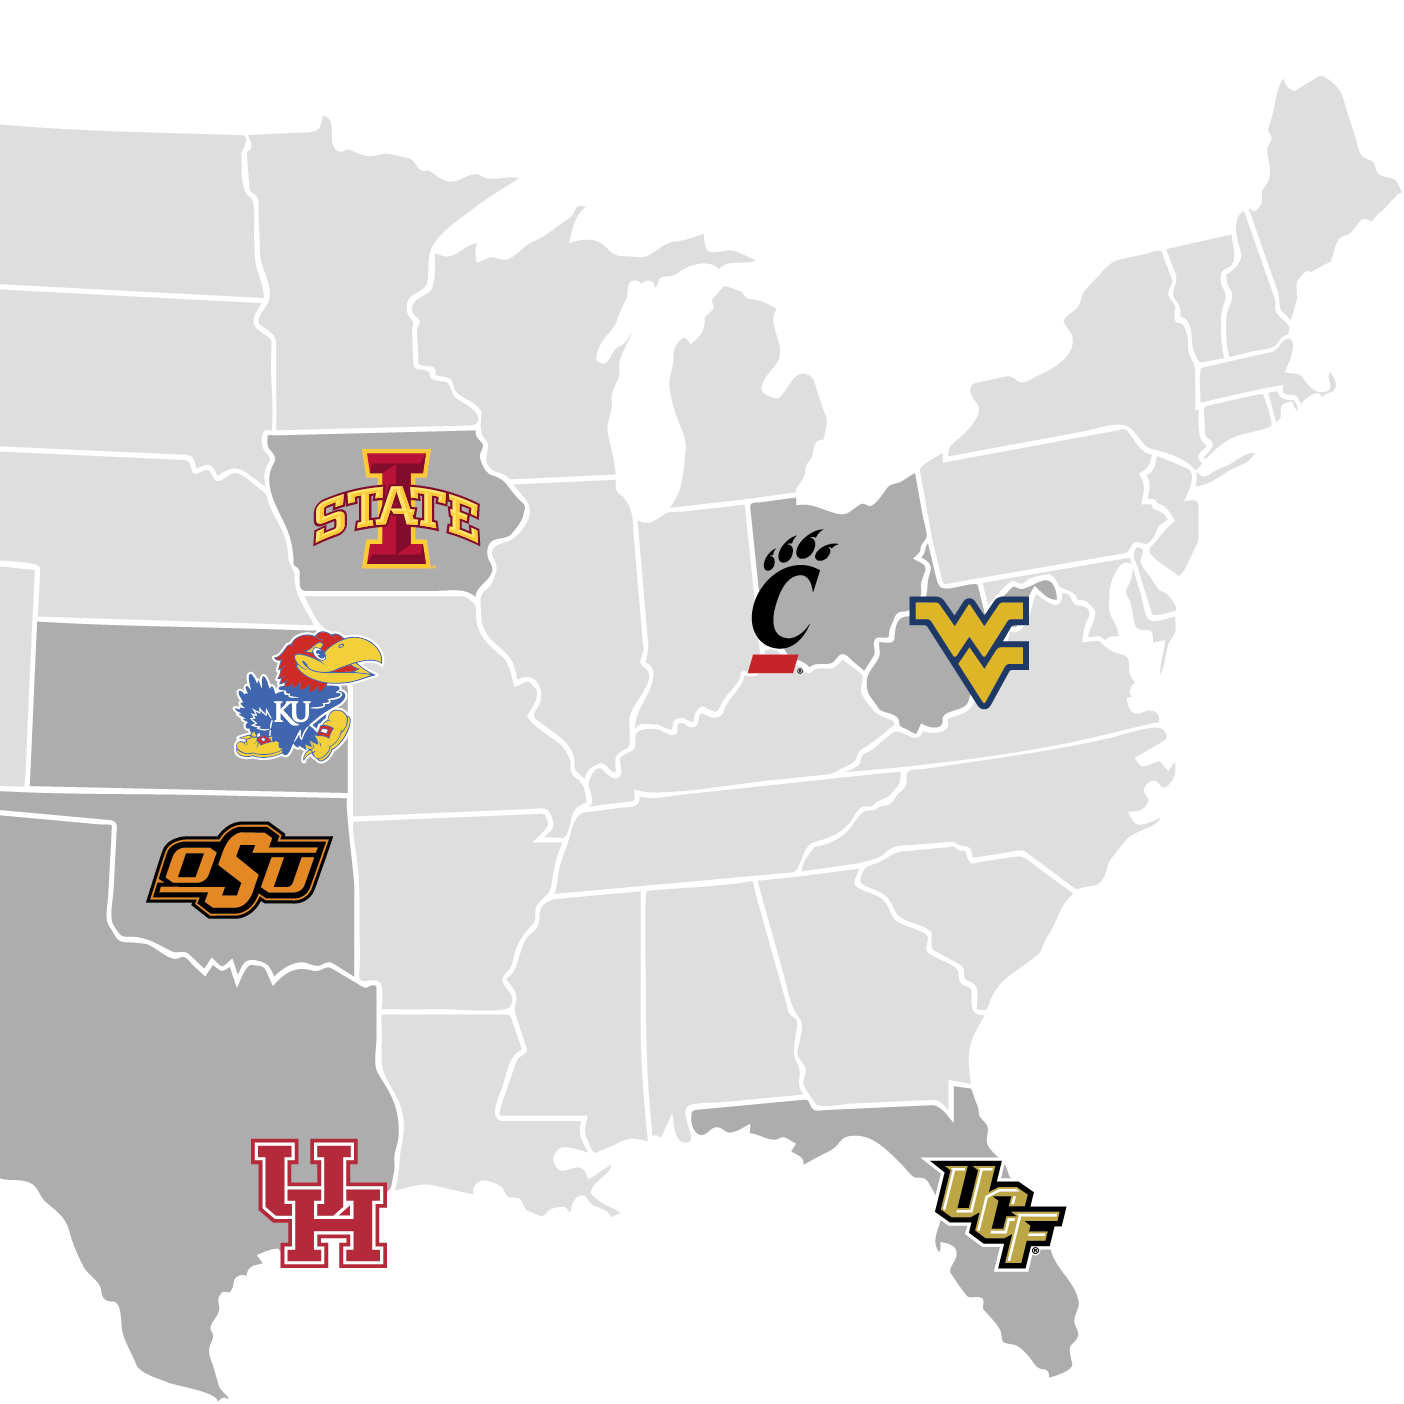 A map of the US showing locations of schools in the Big 12